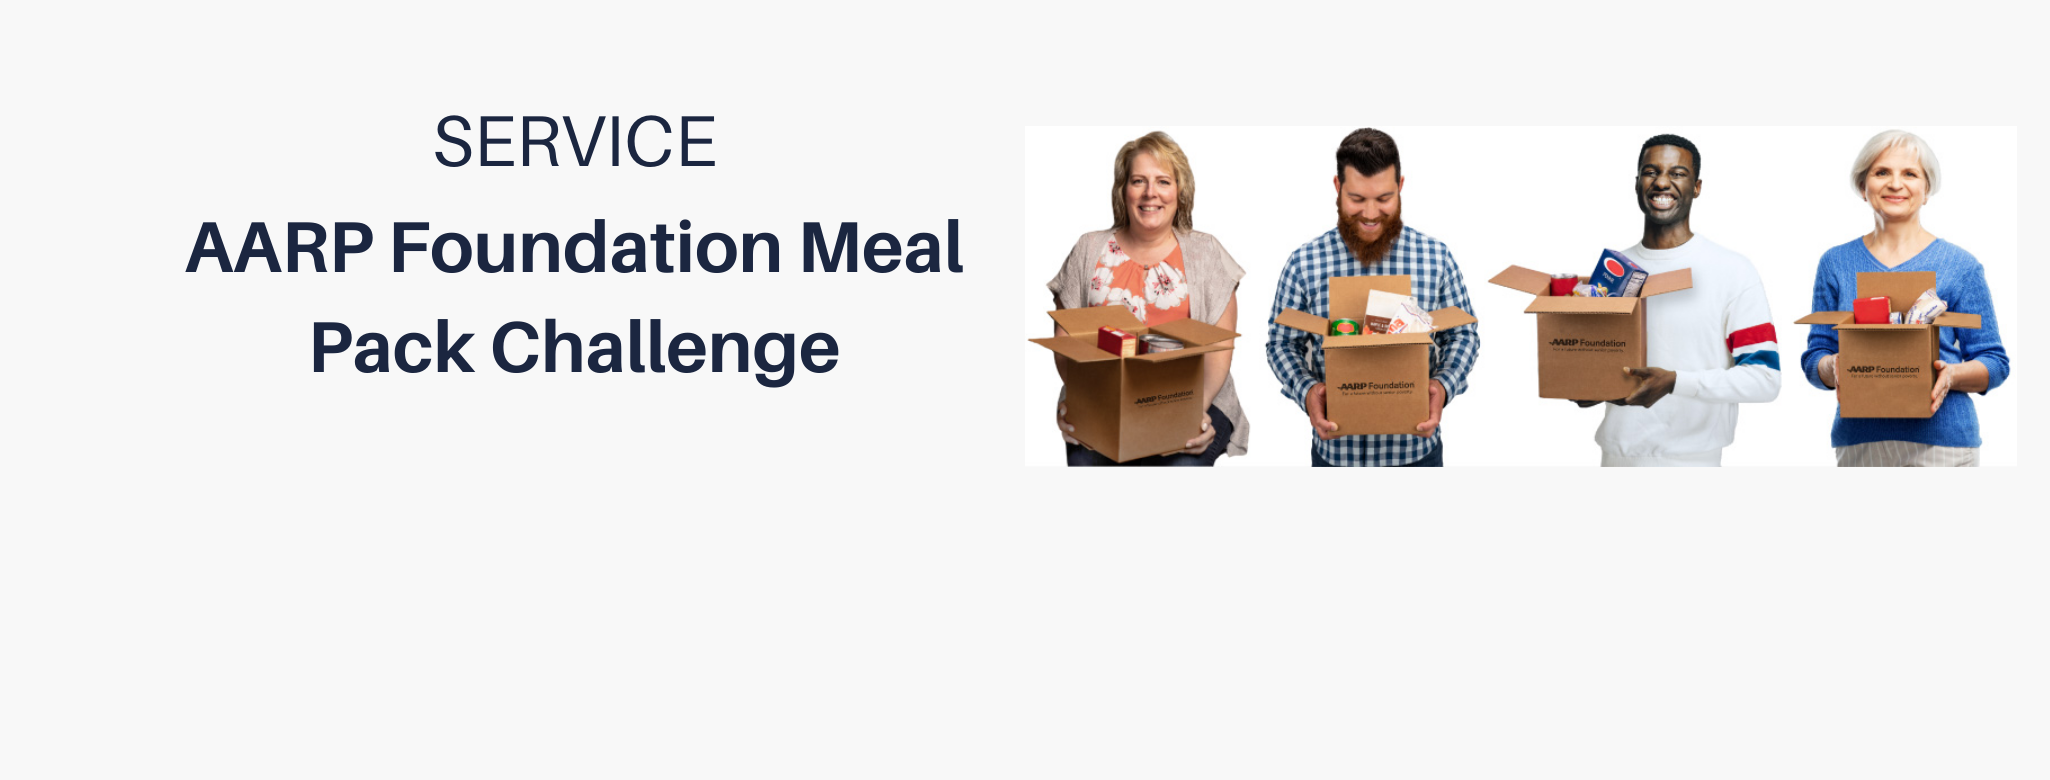 Help pack meals for AARP